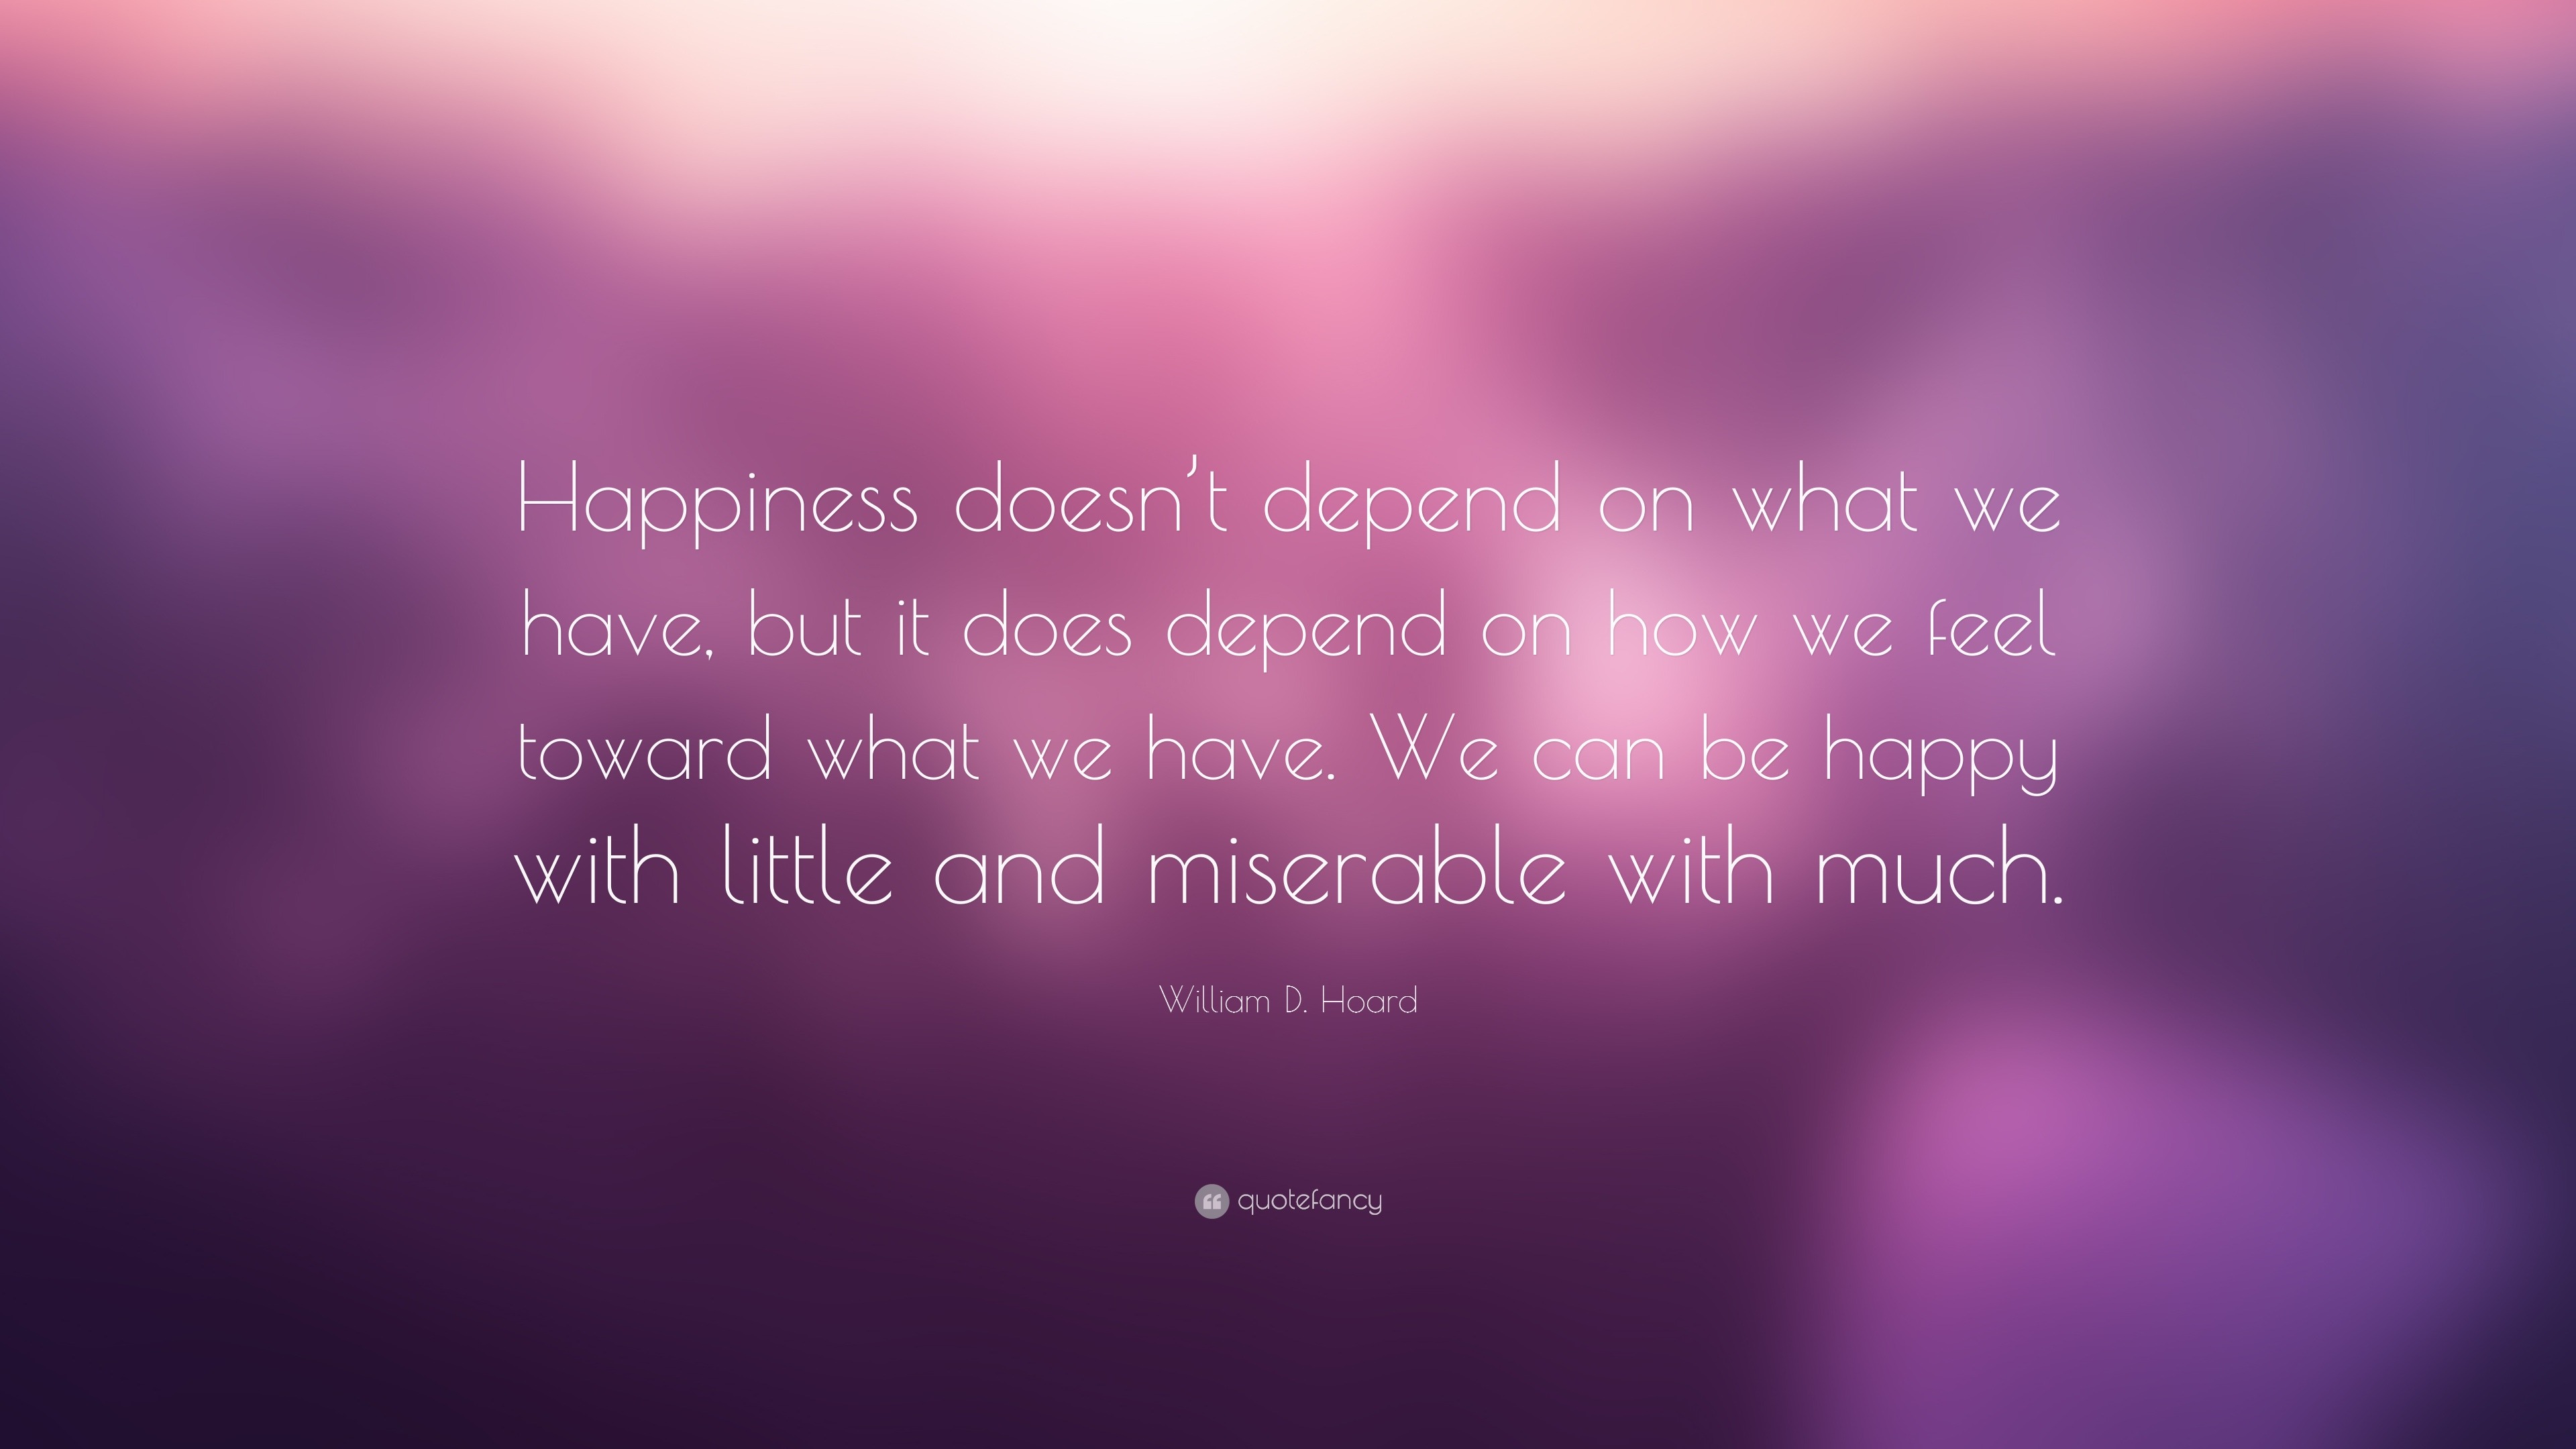 William D. Hoard Quote: “Happiness doesn’t depend on what we have, but ...